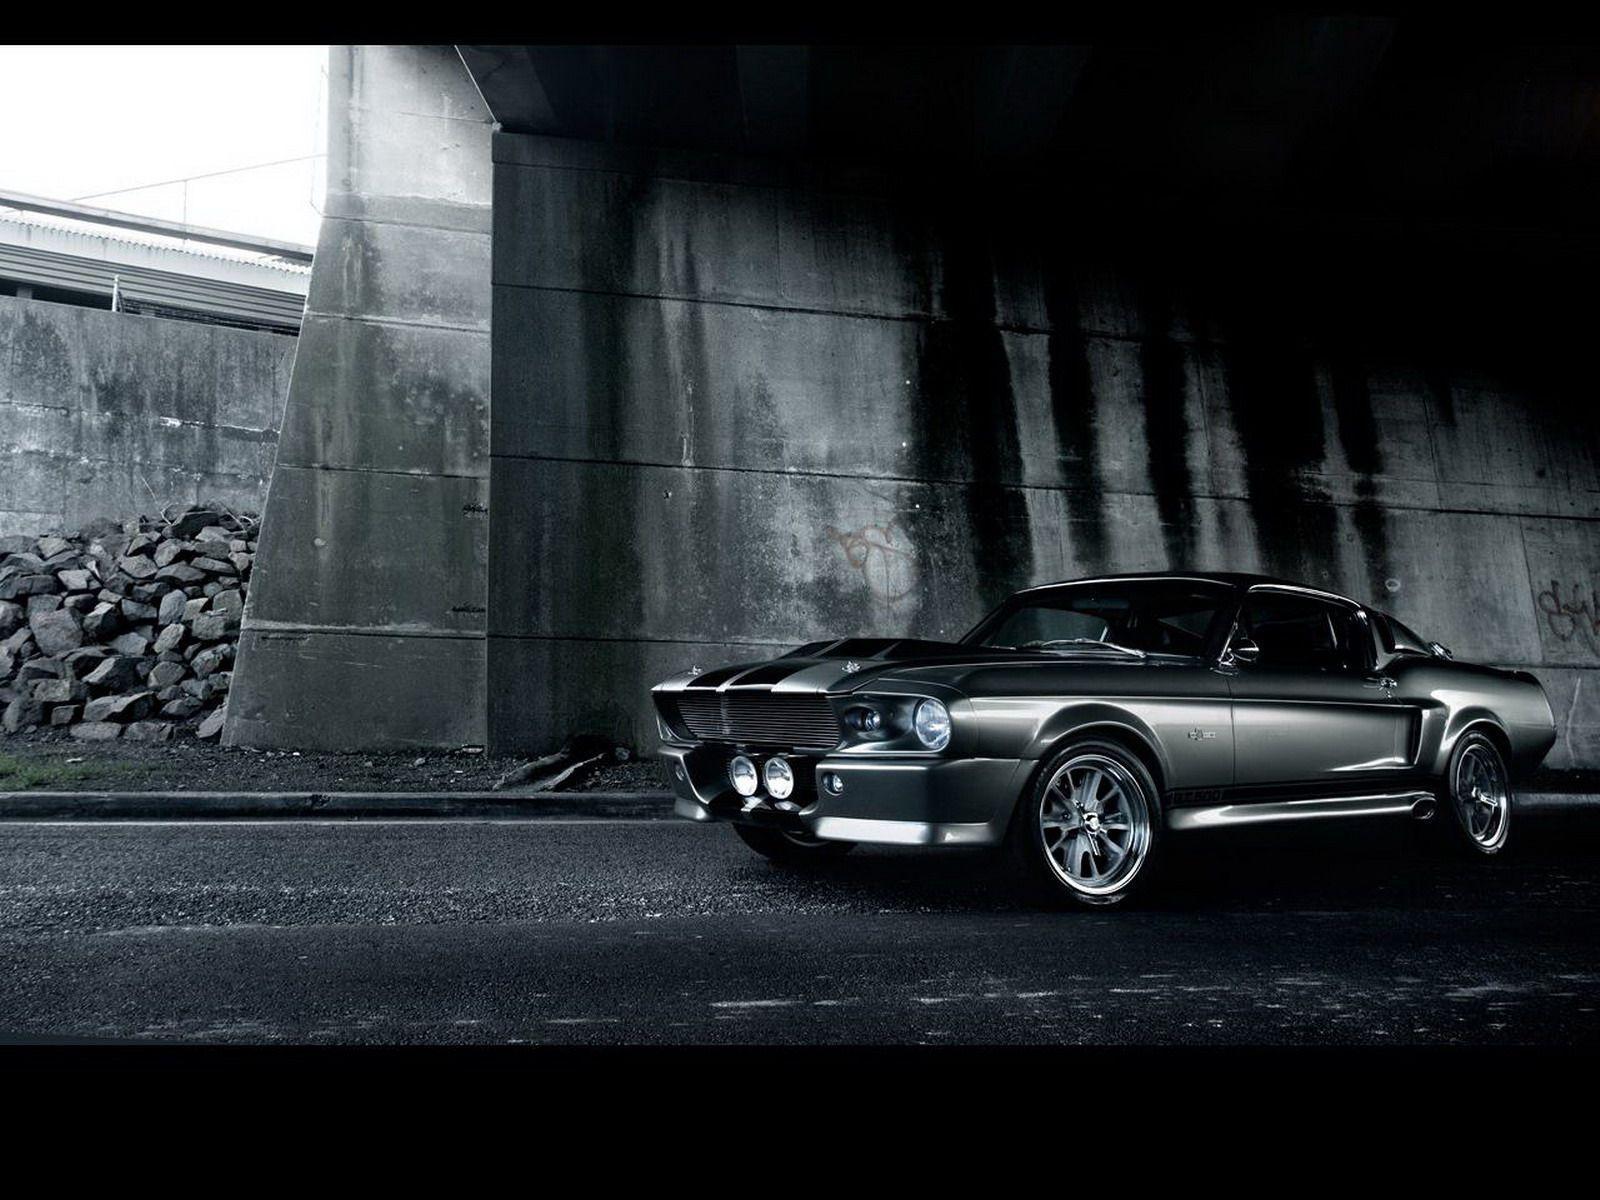 Ford Mustang Shelby Gt500 wallpaper 41064